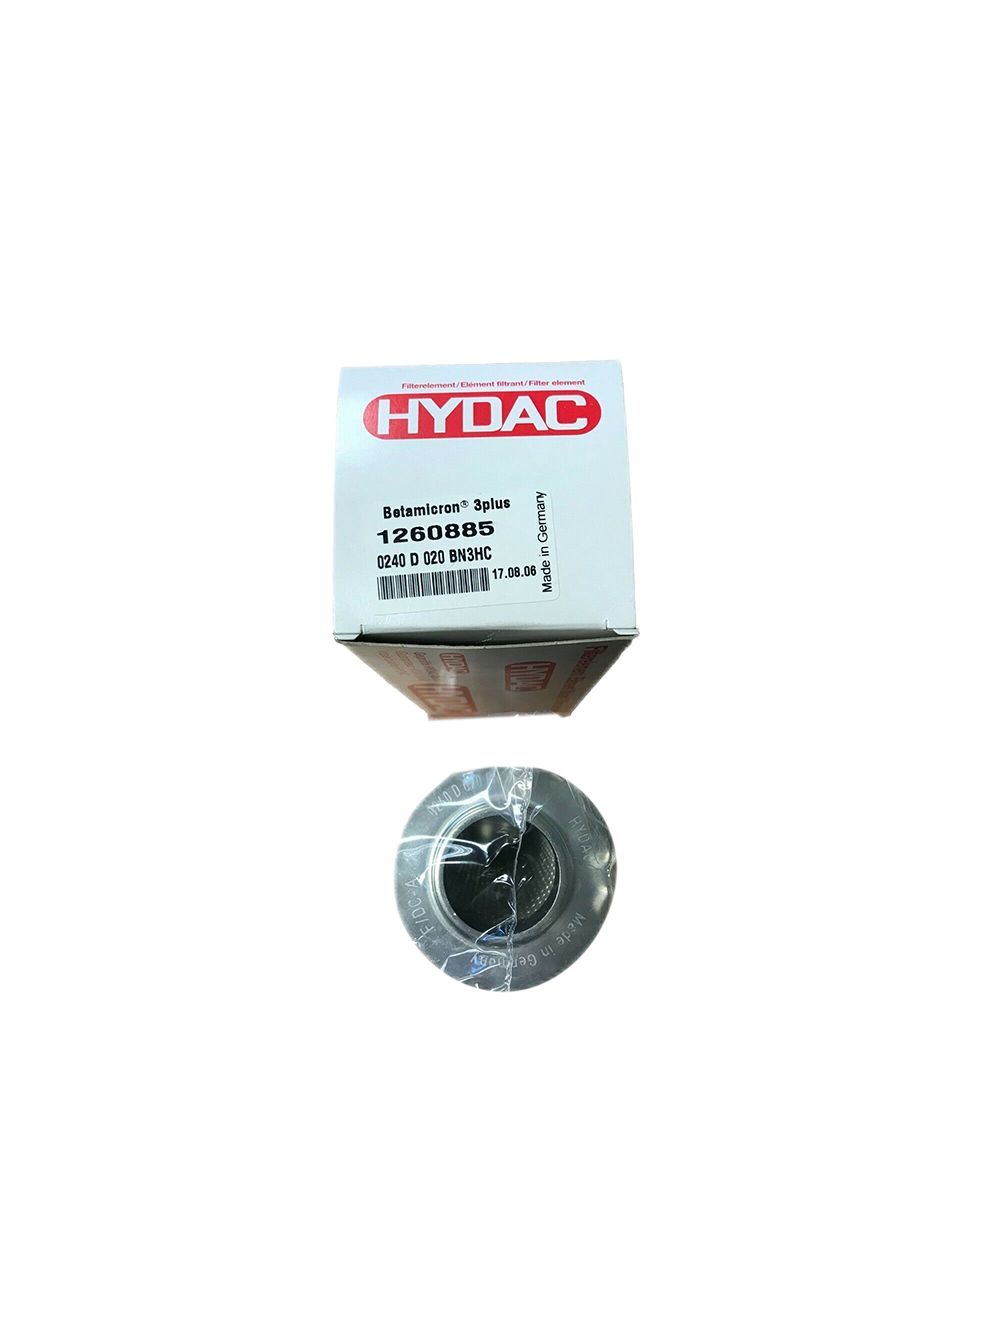 New In stock for sale, HYDAC Filter 0240D020BN3HC